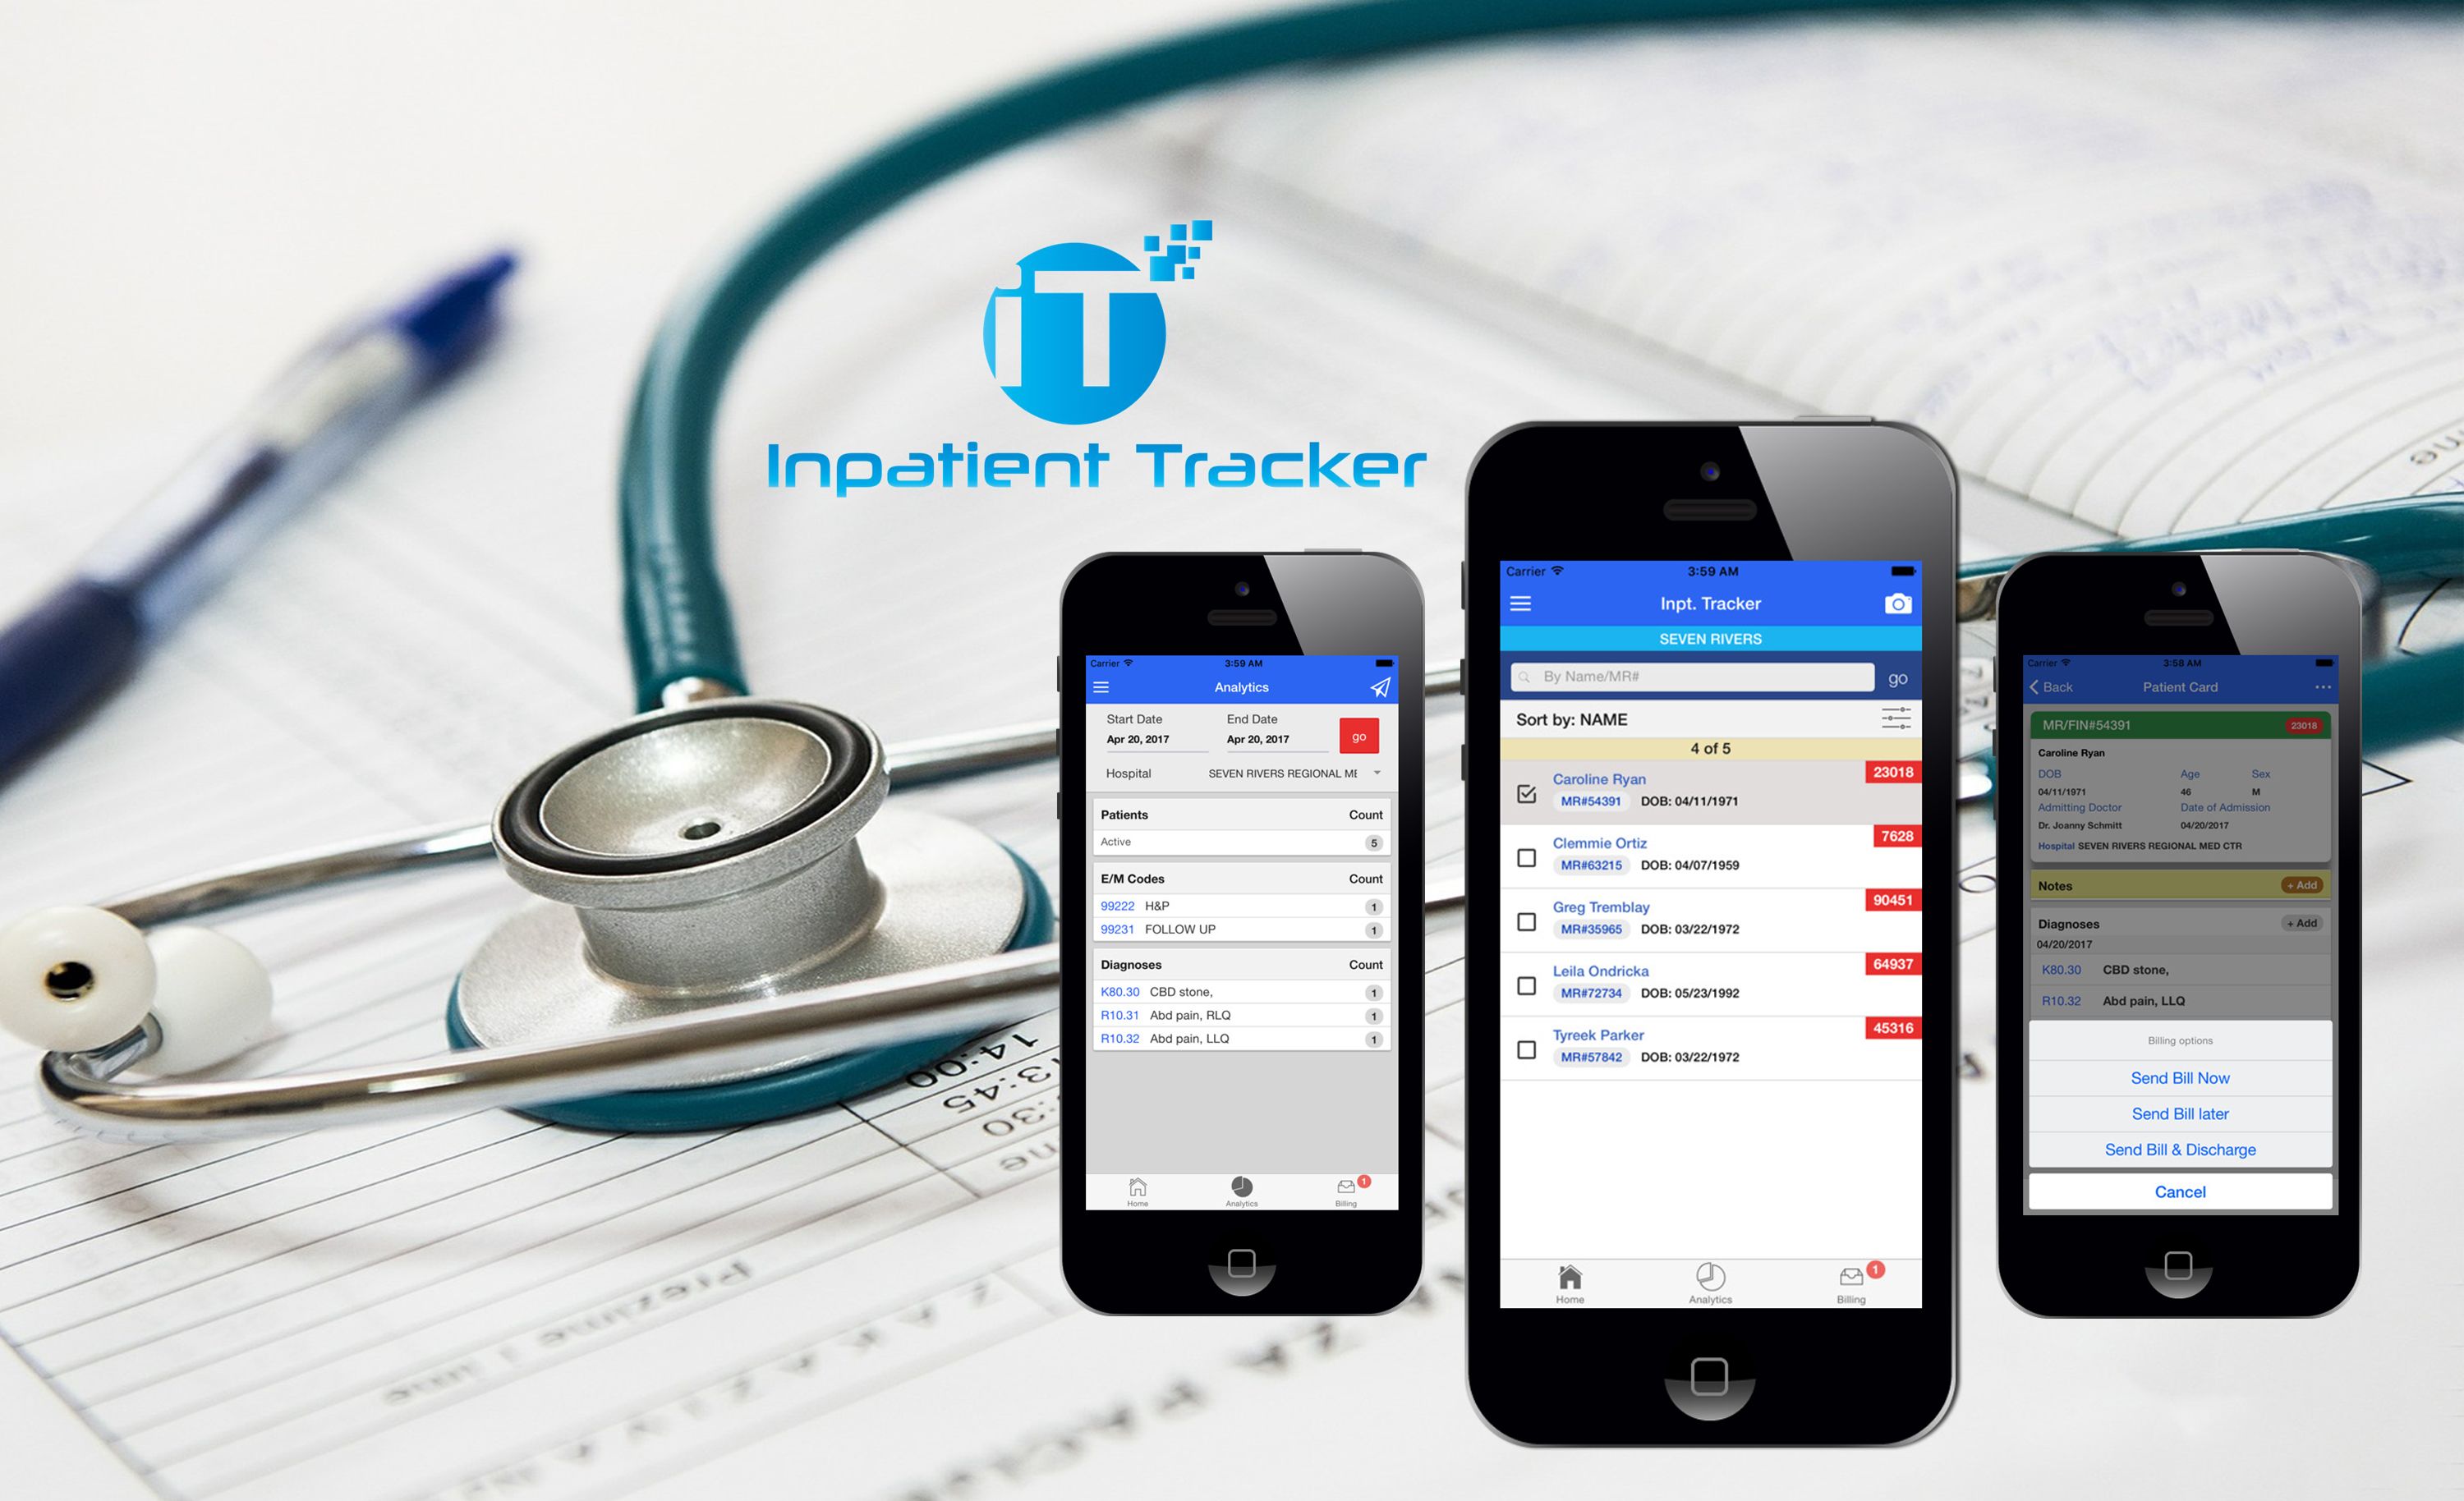 http://ptscout.com/wp-content/uploads/2015/11/Inpatient_Tracker_Product1.png